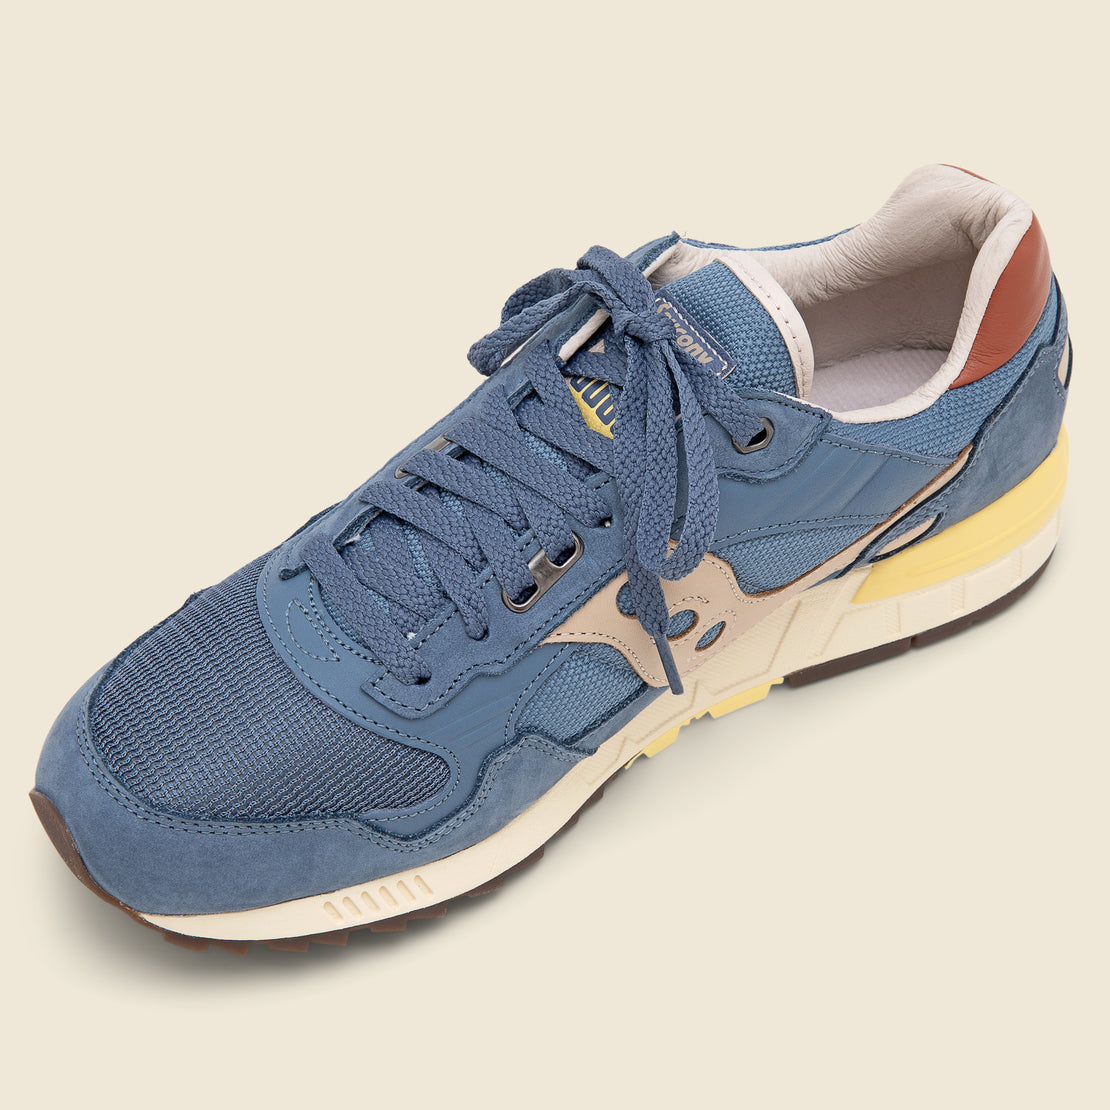 Shadow 5000 Sneaker - Denim/Tan - Saucony - STAG Provisions - Shoes - Athletic